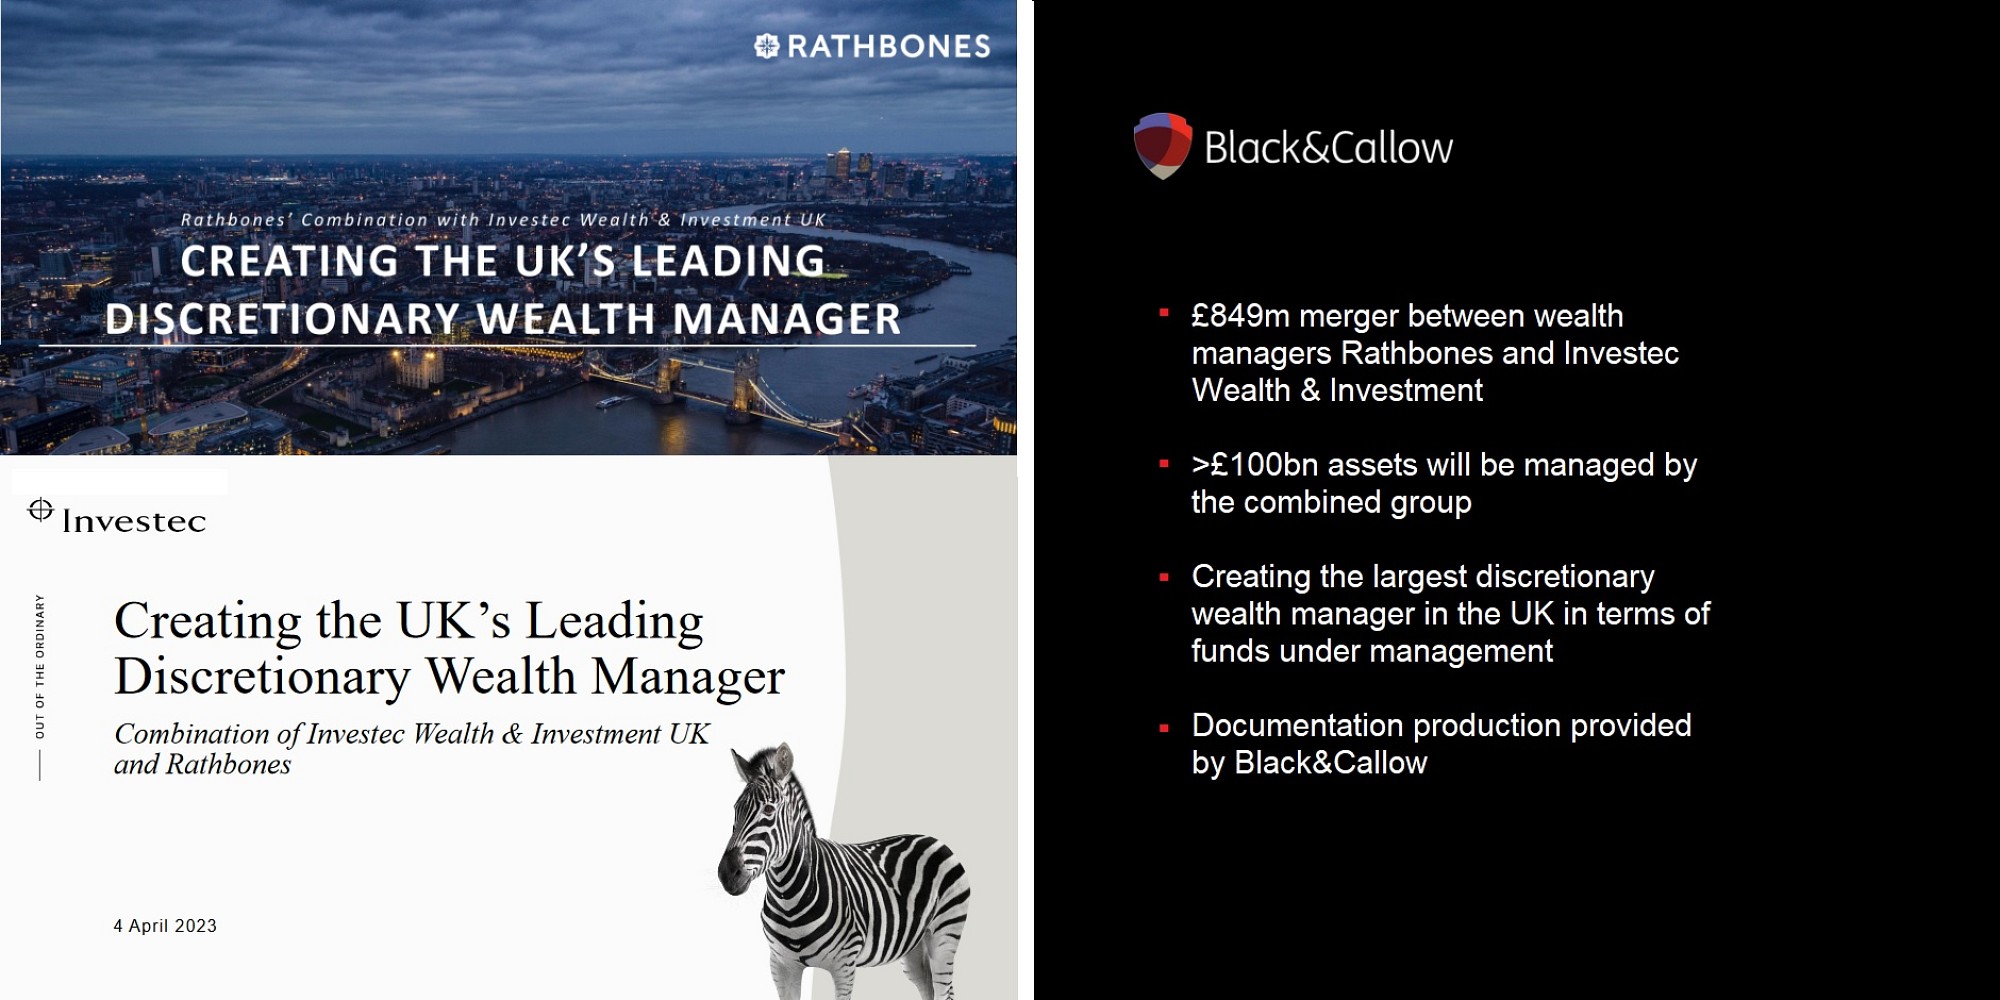 Creating the UK's largest wealth manager: helping Rathbones & Investec's mammoth merger